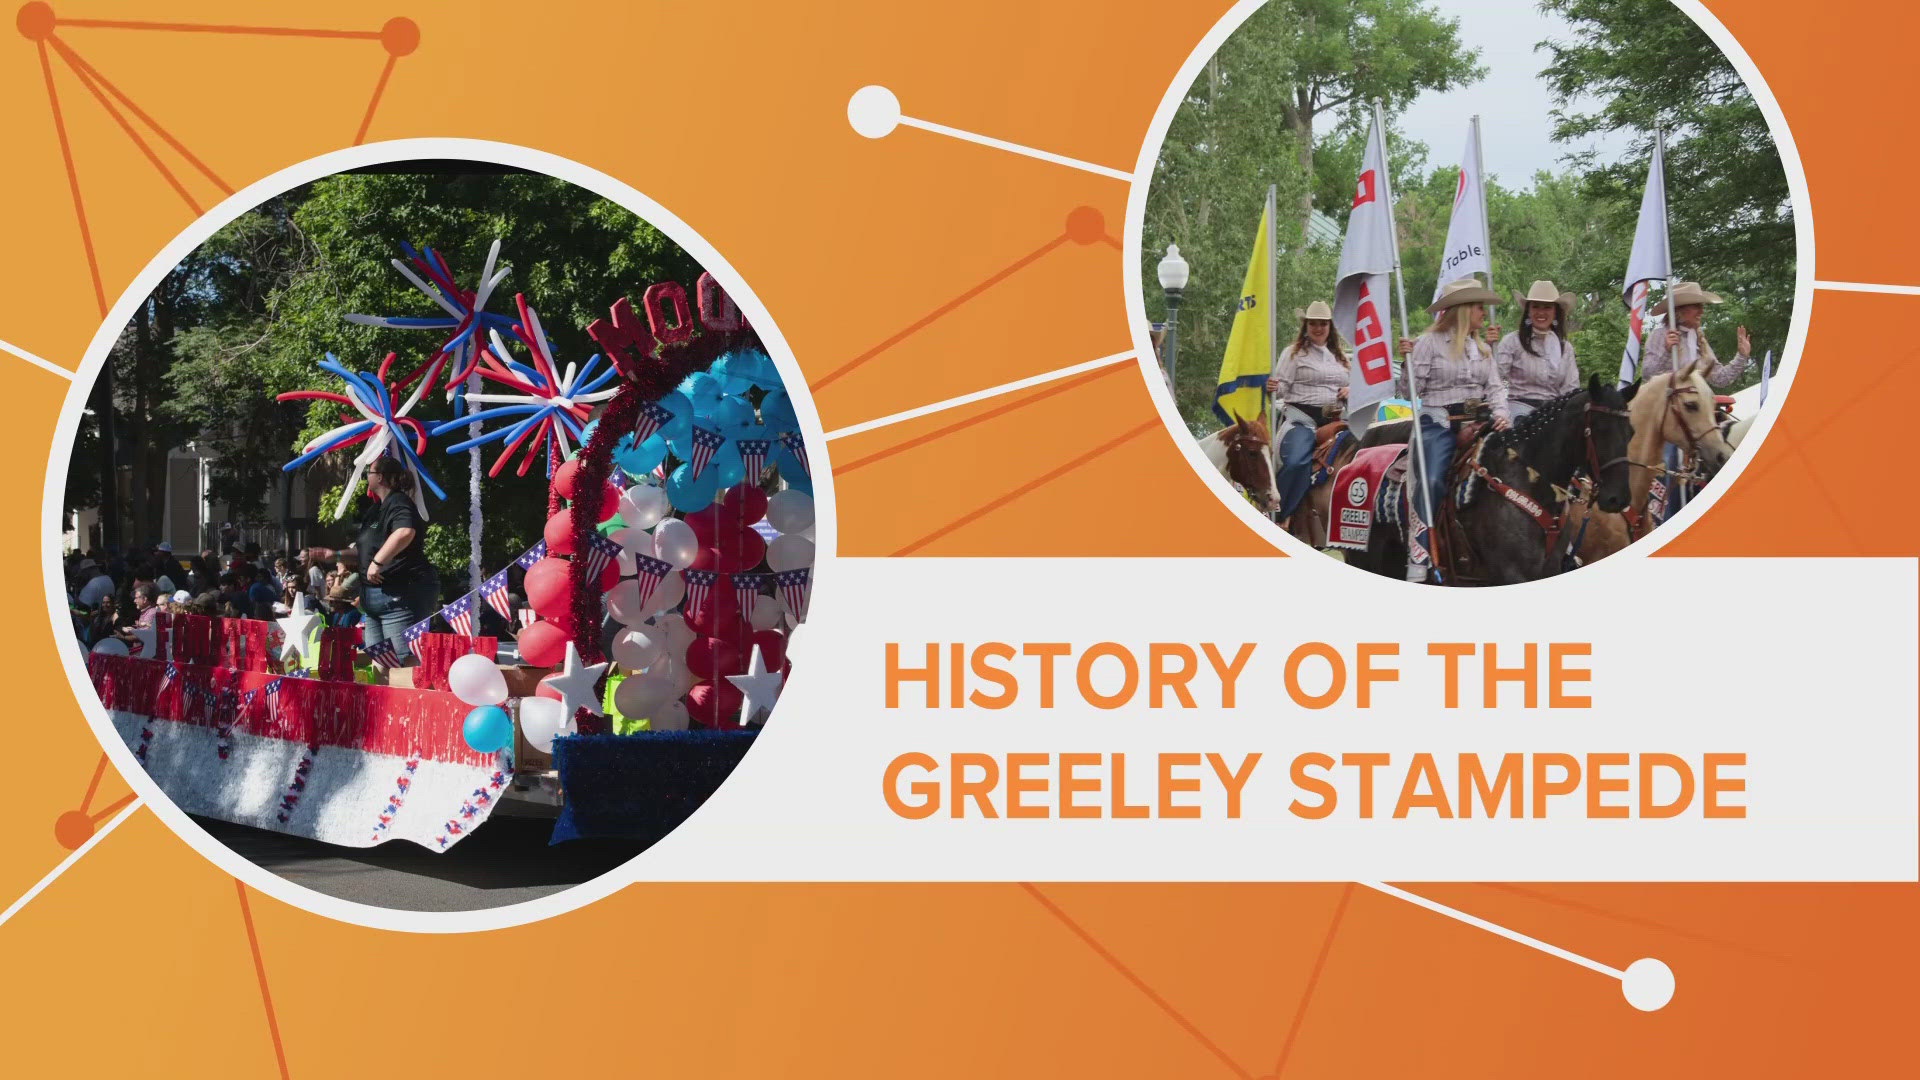 The 102nd annual Greeley Stampede opens Wednesday and runs through Sunday, July 7, extending past its traditional Independence Day closing date.